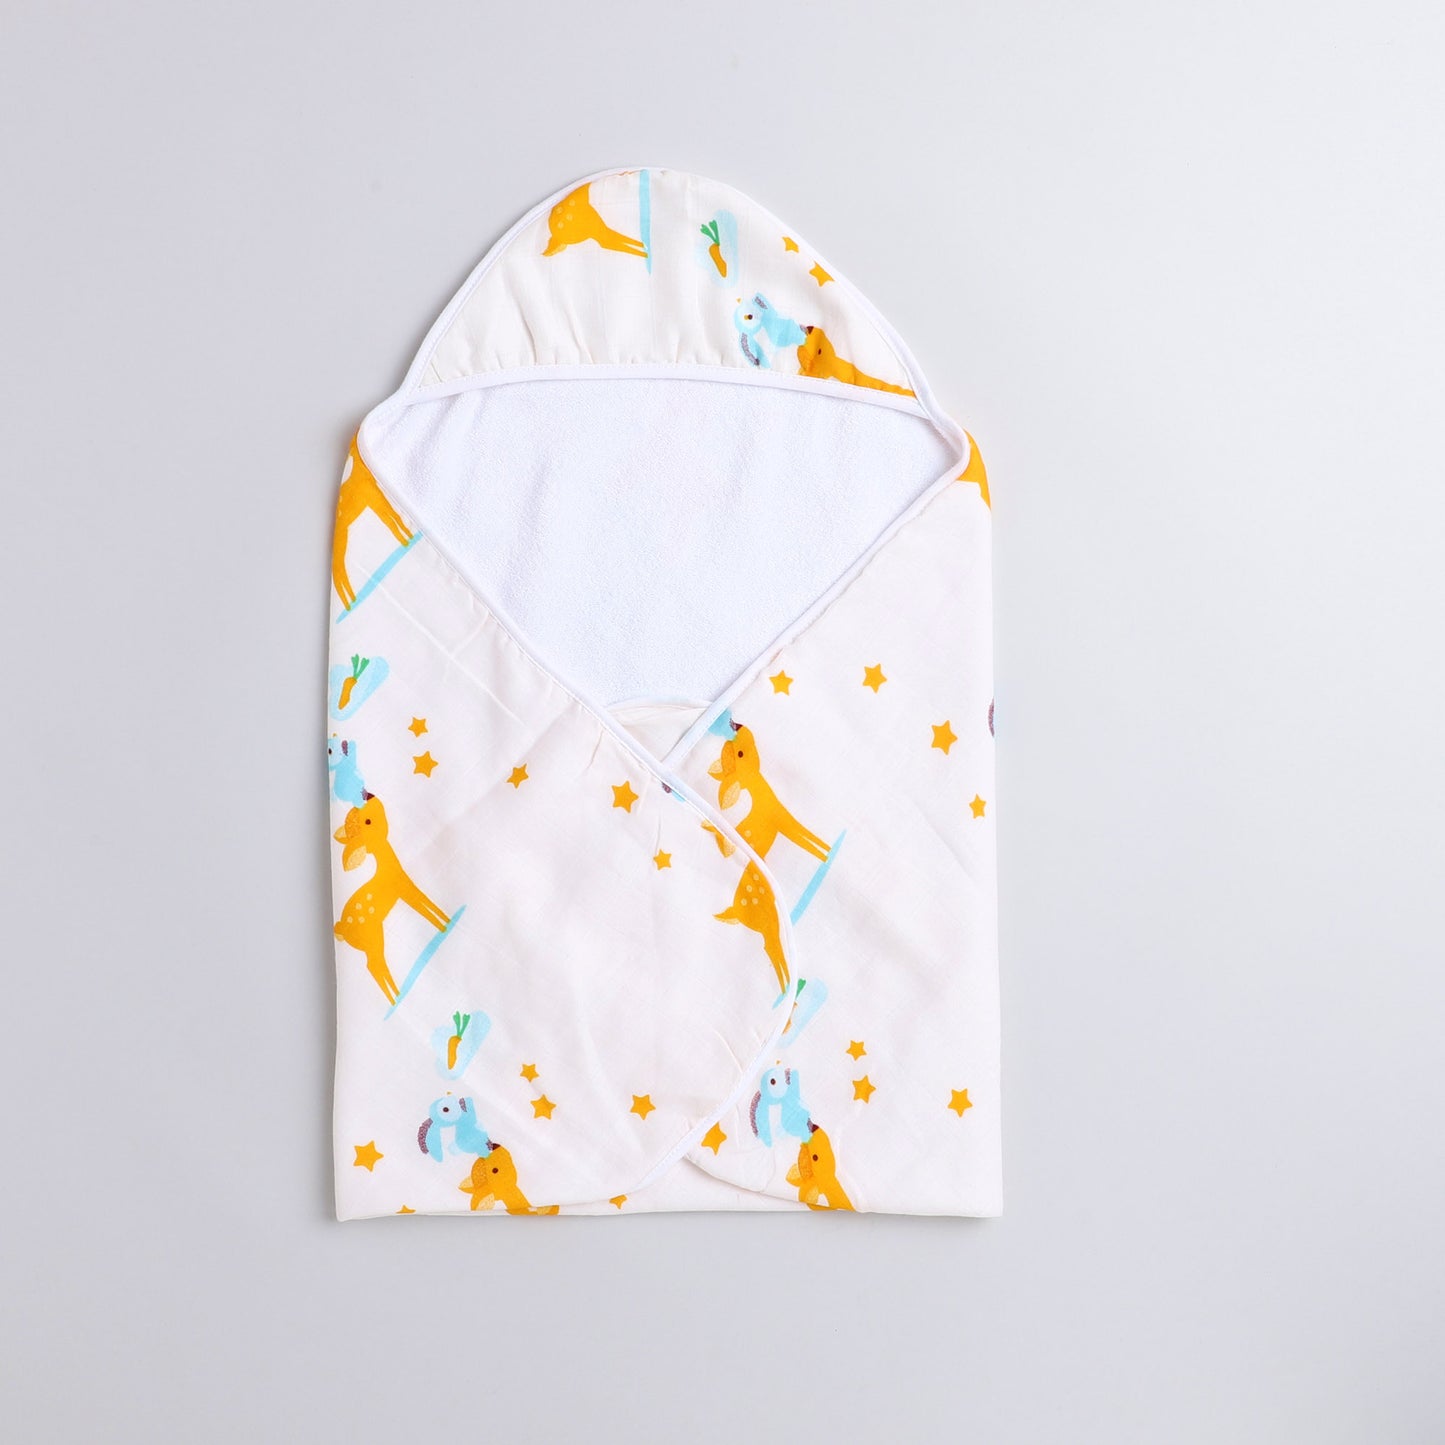 POLKA TOTS Soft Organic Dual Layer Muslin Cotton and Terry Hooded Baby Towel Soft Absorbent (Deer)